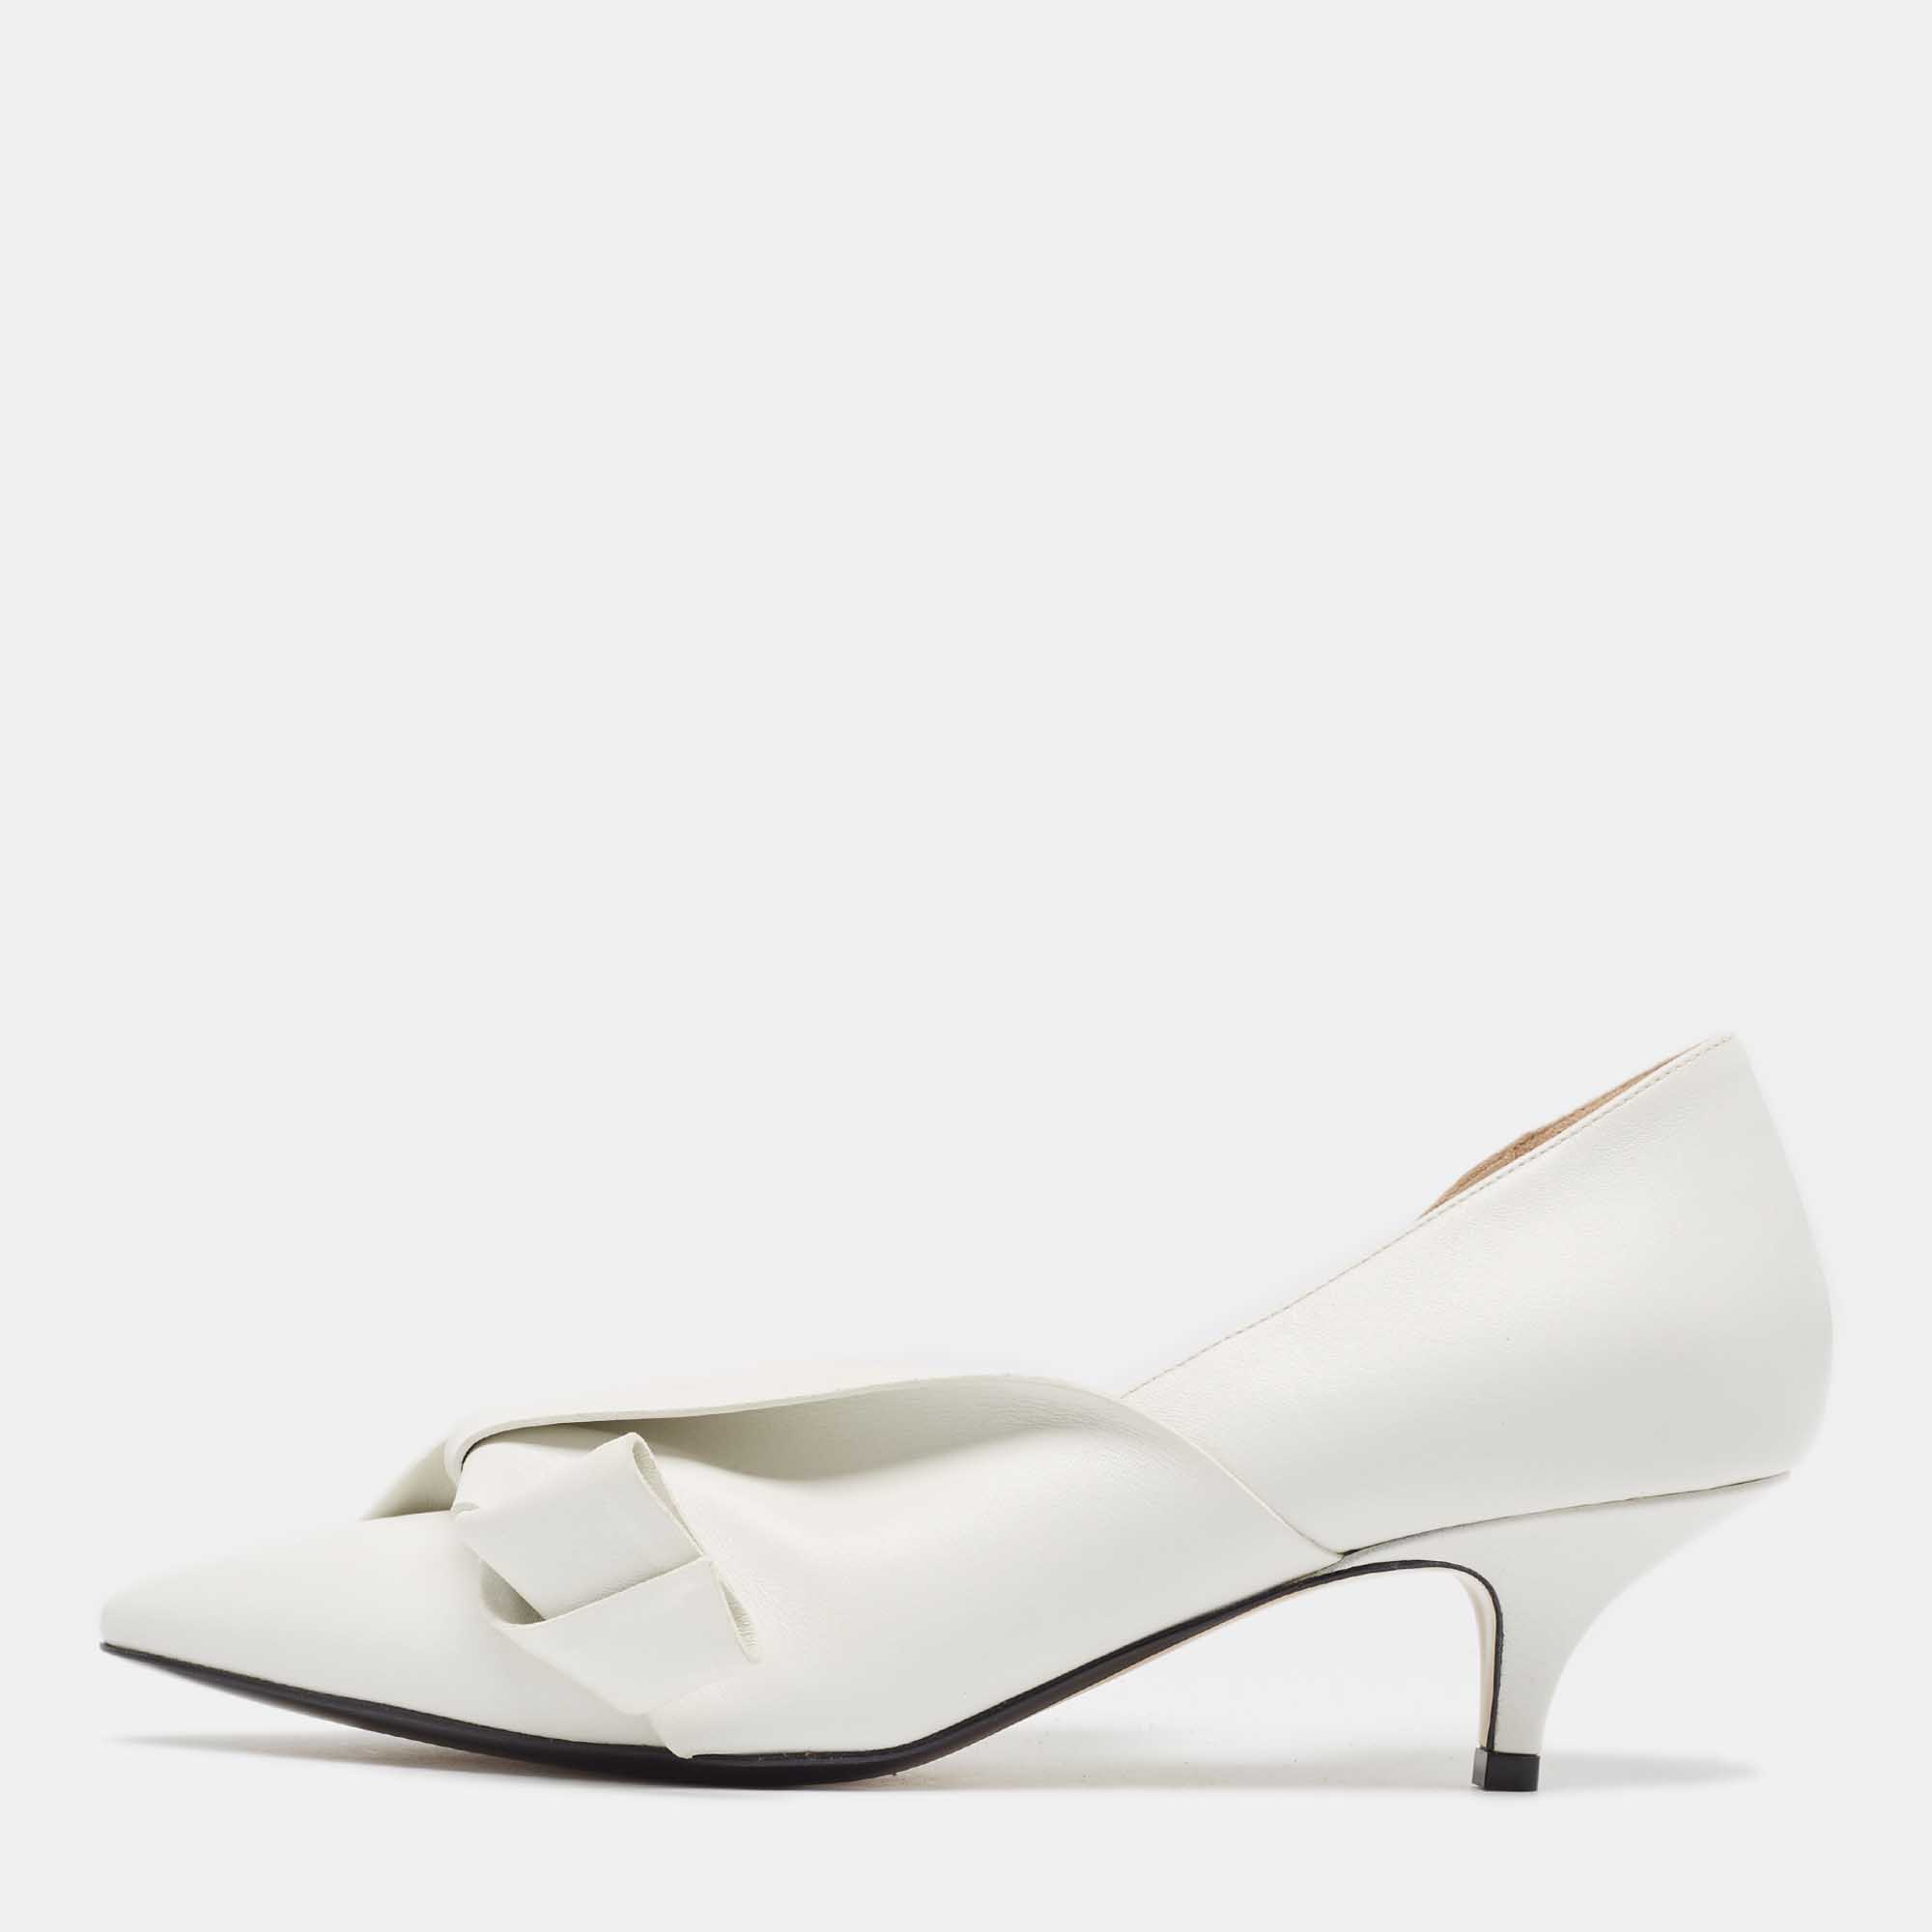 N21 n&ordm;21 white leather tundra knotted d'orsay pumps size 37